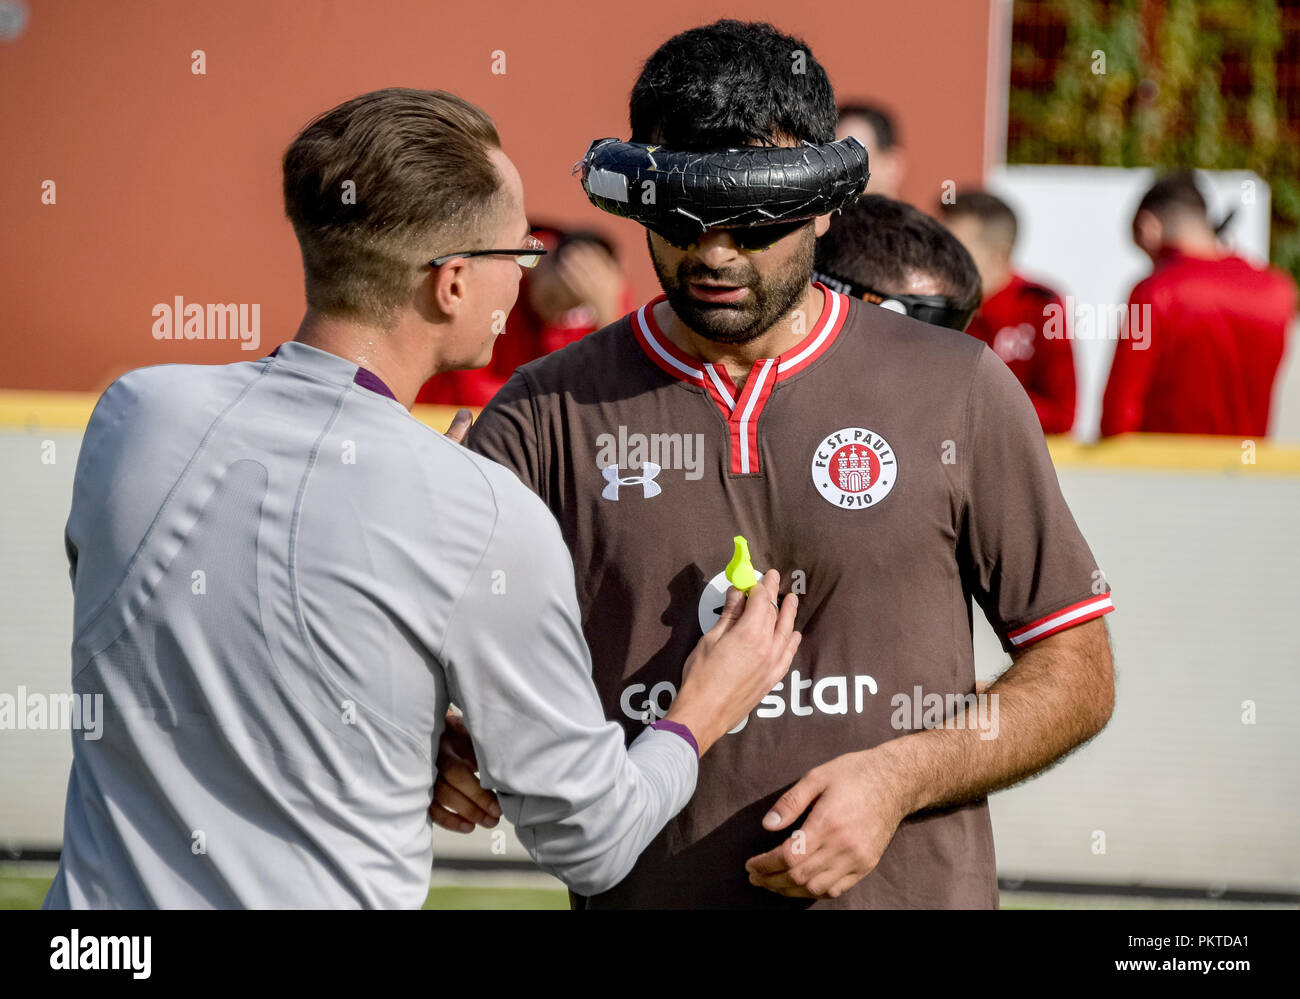 15 September 2018, Hamburg: Serdal Celebi (r), FC St. Pauli footballer for the blind, speaks to the referee at the 11th Masters on the grounds of the Bildungszentrum für Blinde und Sehbehinderte on Borgweg. Celebi is the first blind football player to be nominated for the 'Goal of the Month' of the ARD sports show. Photo: Axel Heimken/dpa Stock Photo